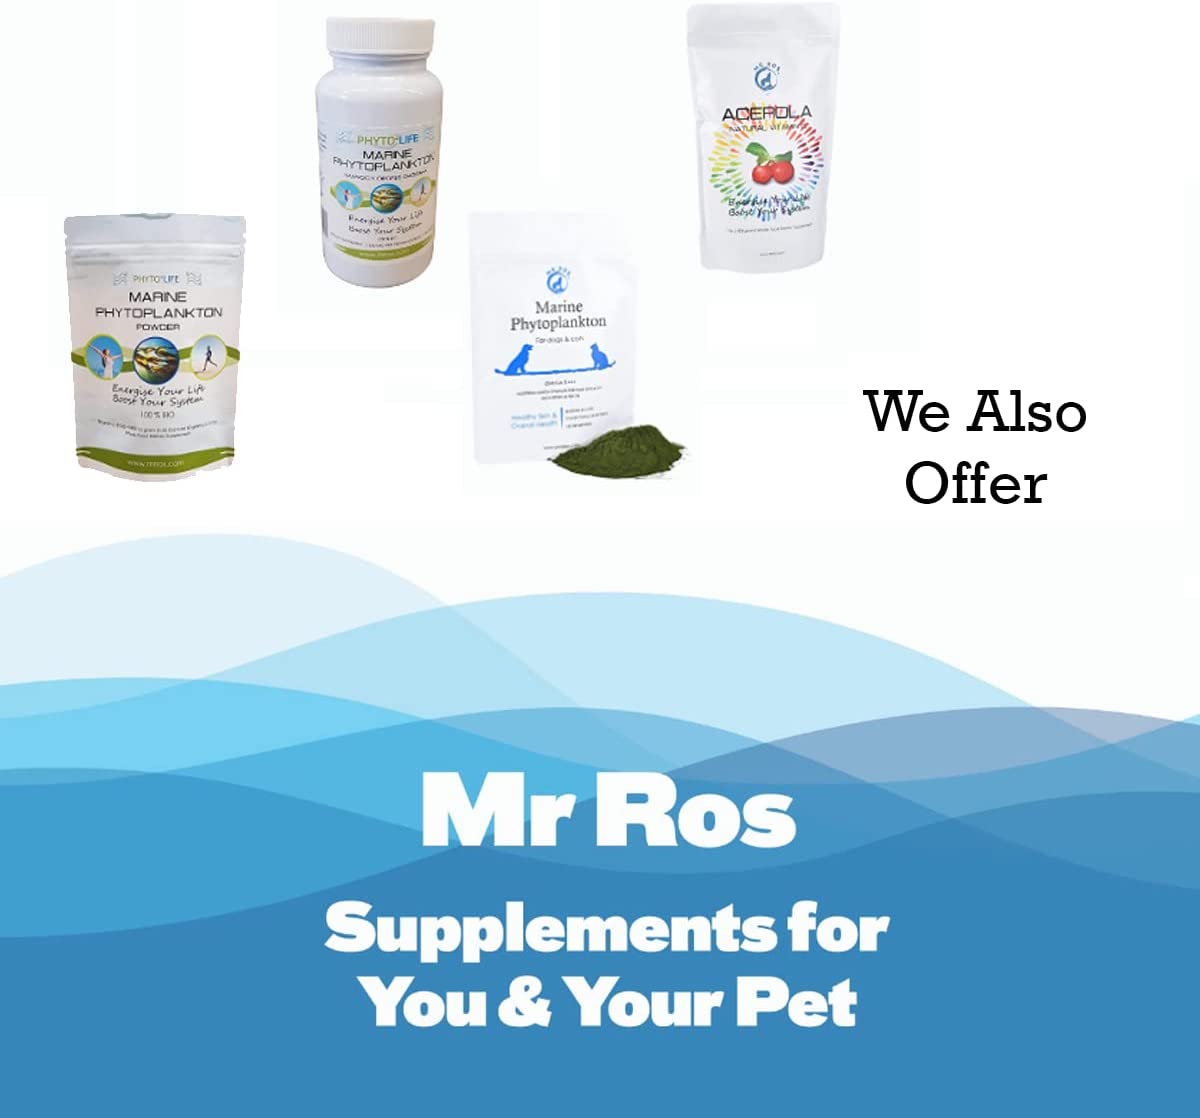 Mr Ros Marine Phytoplankton Bulk Powder for Energy and Tiredness for Women, Men and Dogs to Boost Your Memory and Focus (Size 1 lb)